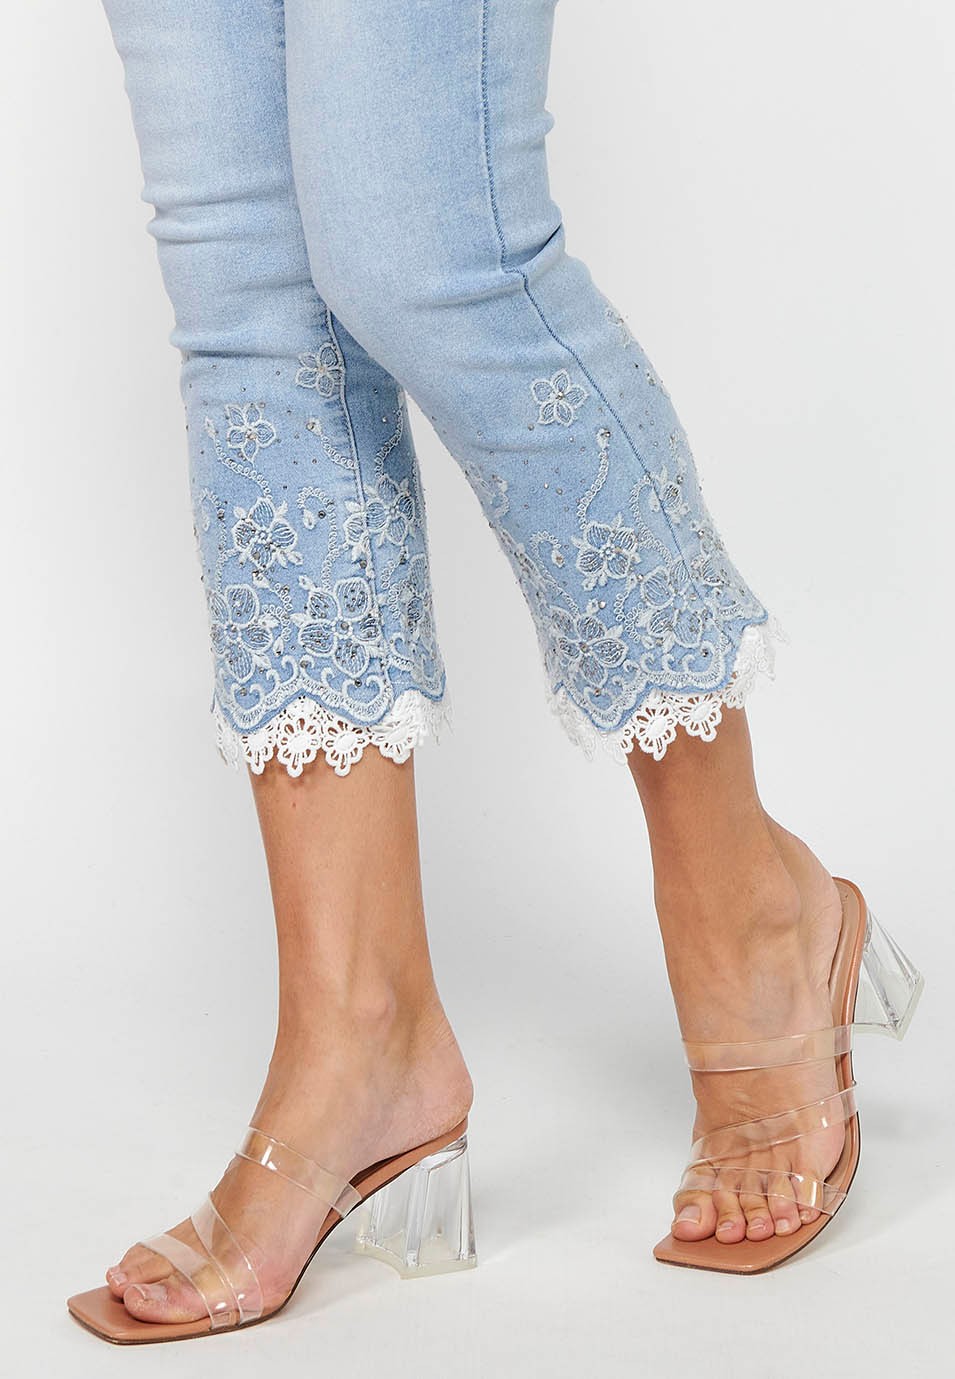 Long slim jeans pants with front zipper closure and light blue floral embroidered details for women 7